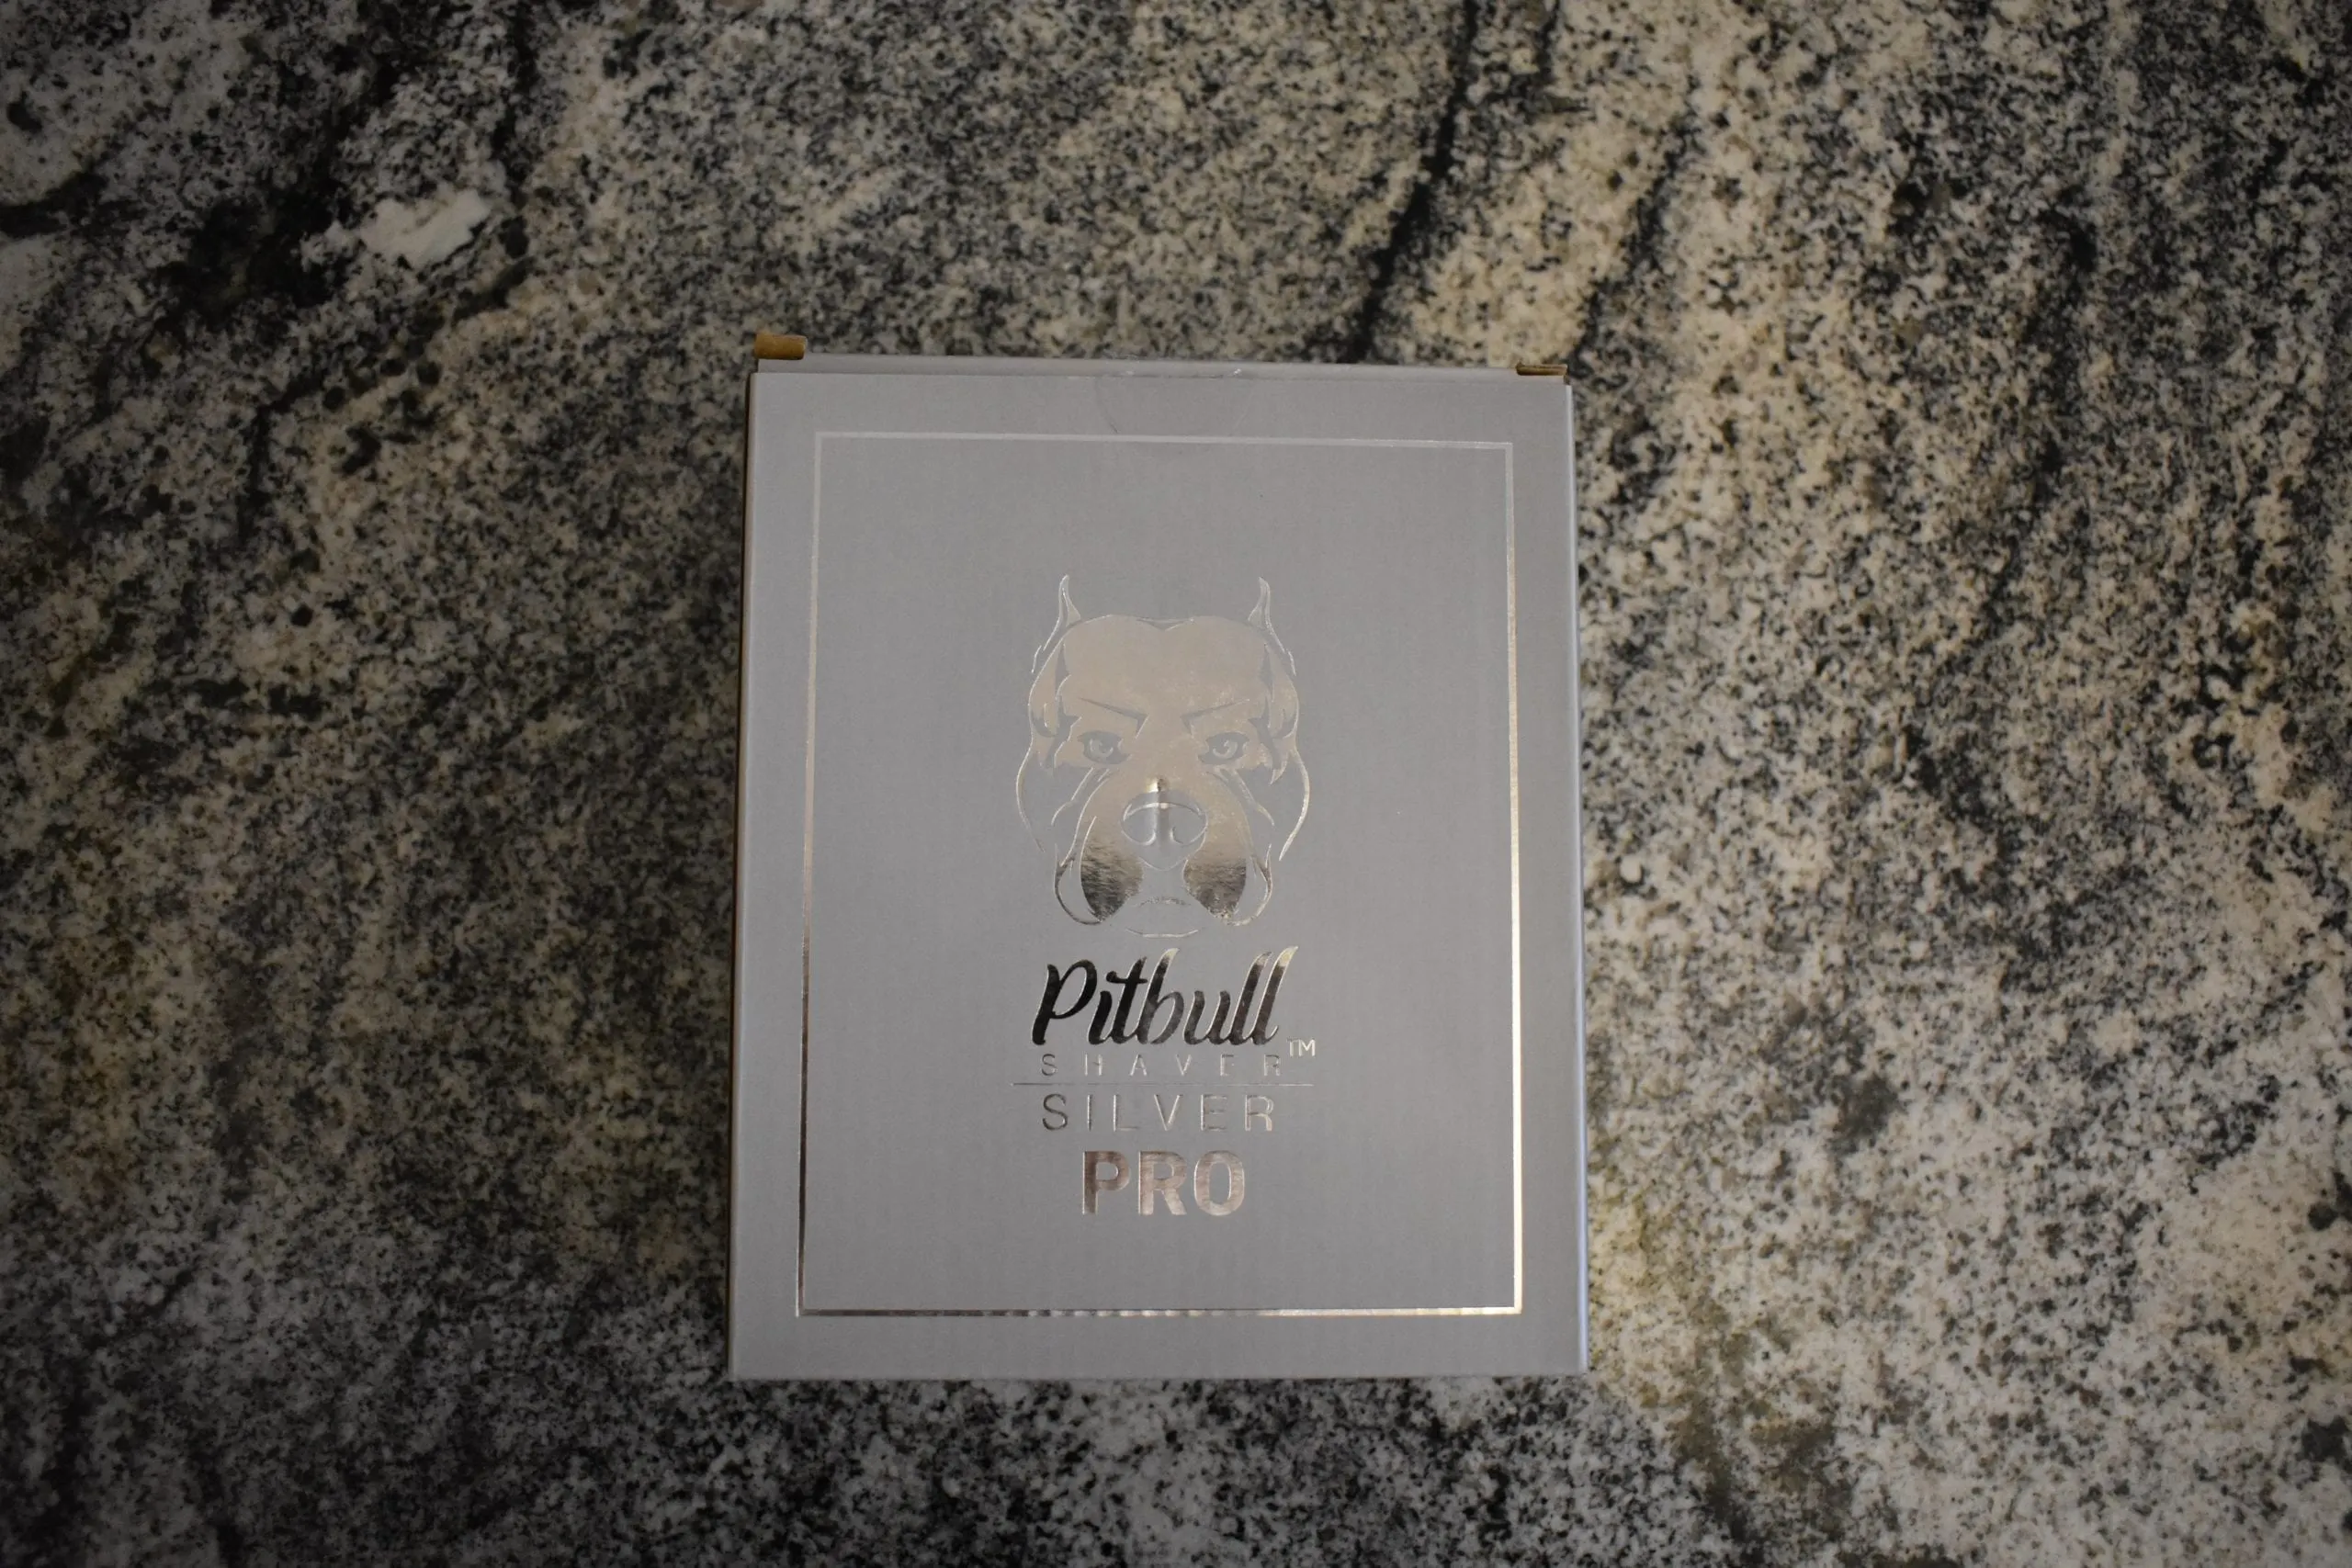 Pitbull silver pro (our pick for the best head shaver) sitting in its unopened box on my counter